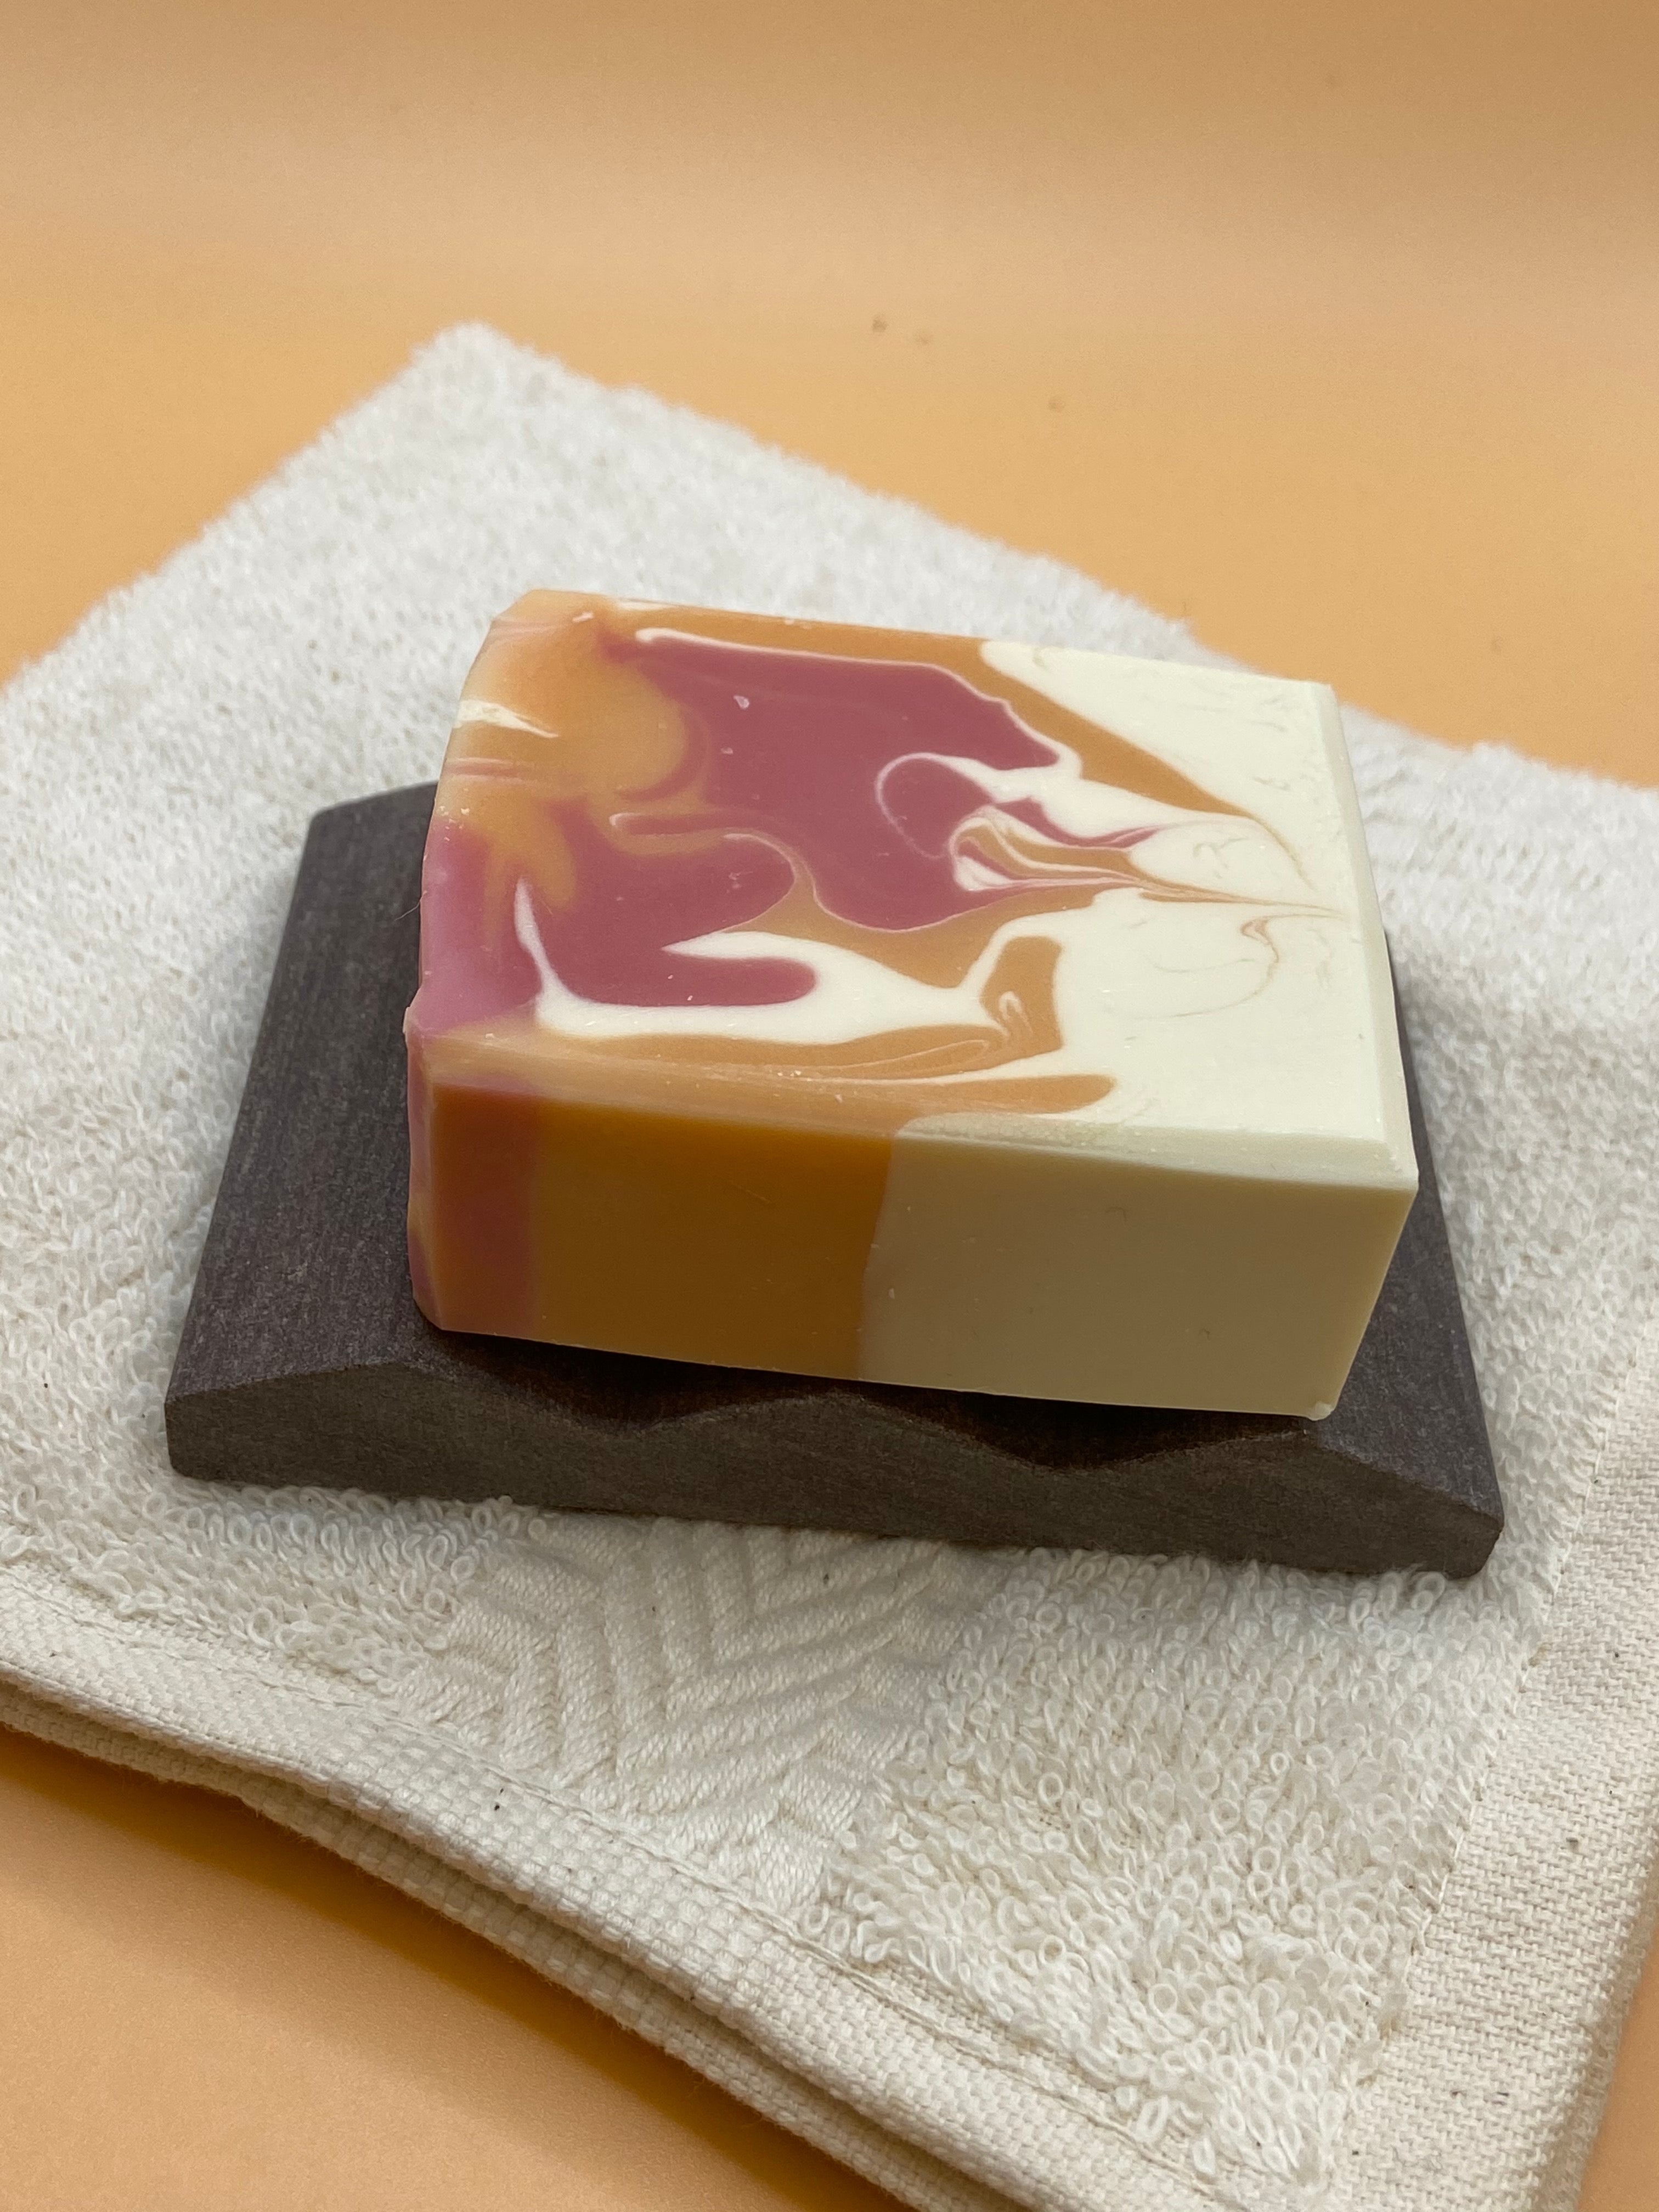 The modern soap dish (with a soap)